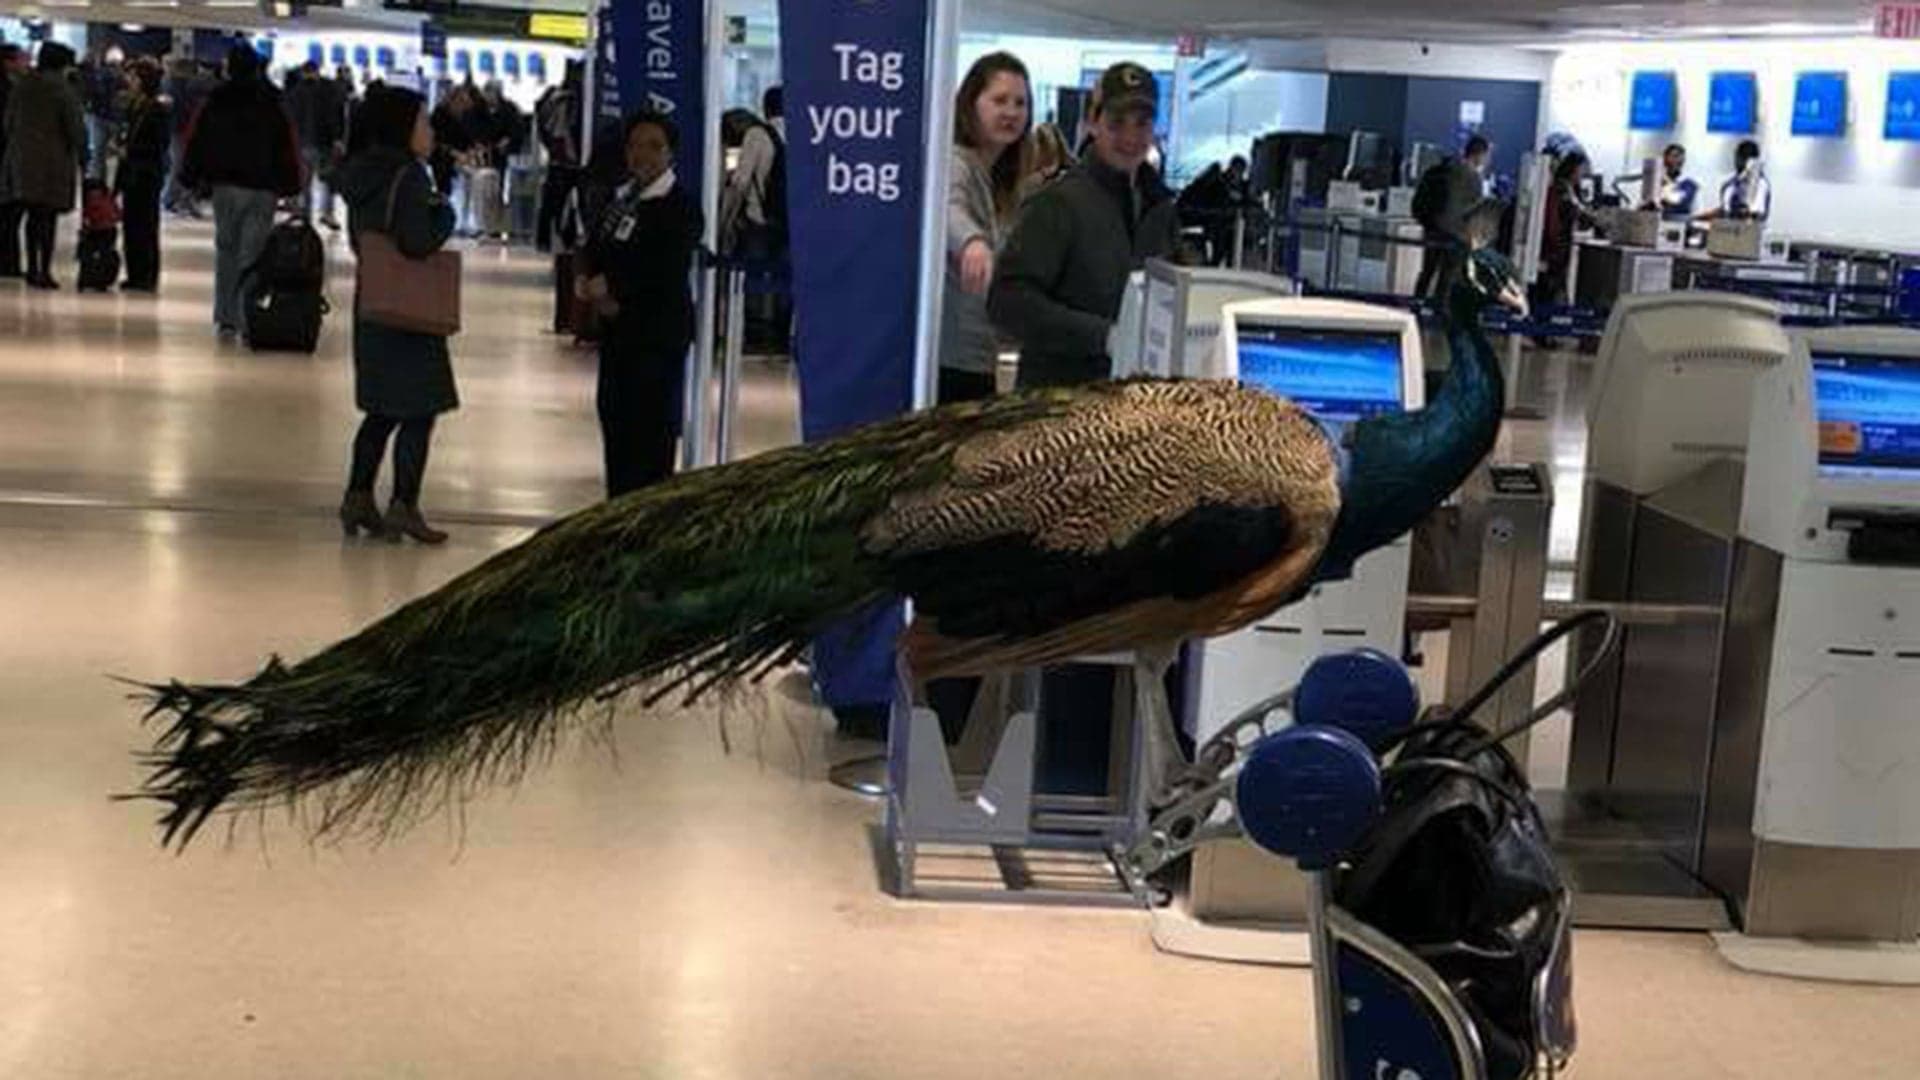 United Airlines Refuses To Let Woman Fly With Emotional Support Peacock